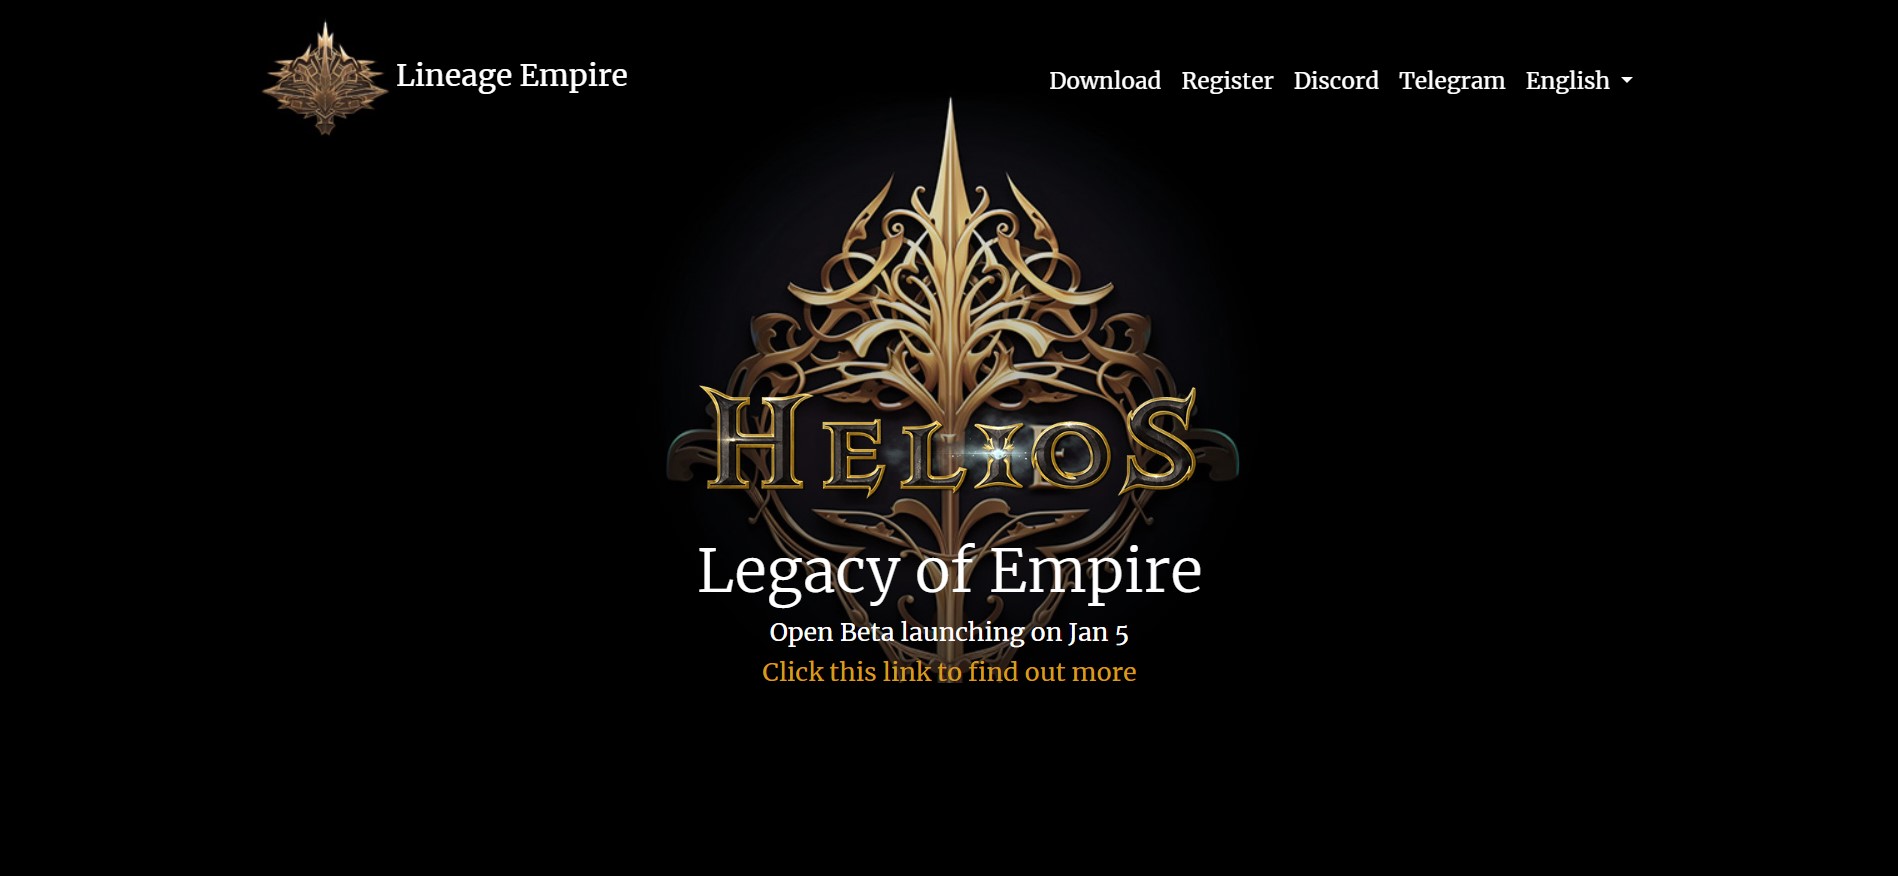 🌌 Lineage Empire: Explore new horizons in the world of Lineage 2 Helios with x3 rates! Join the battle at lineage-empire.com! ⚔️